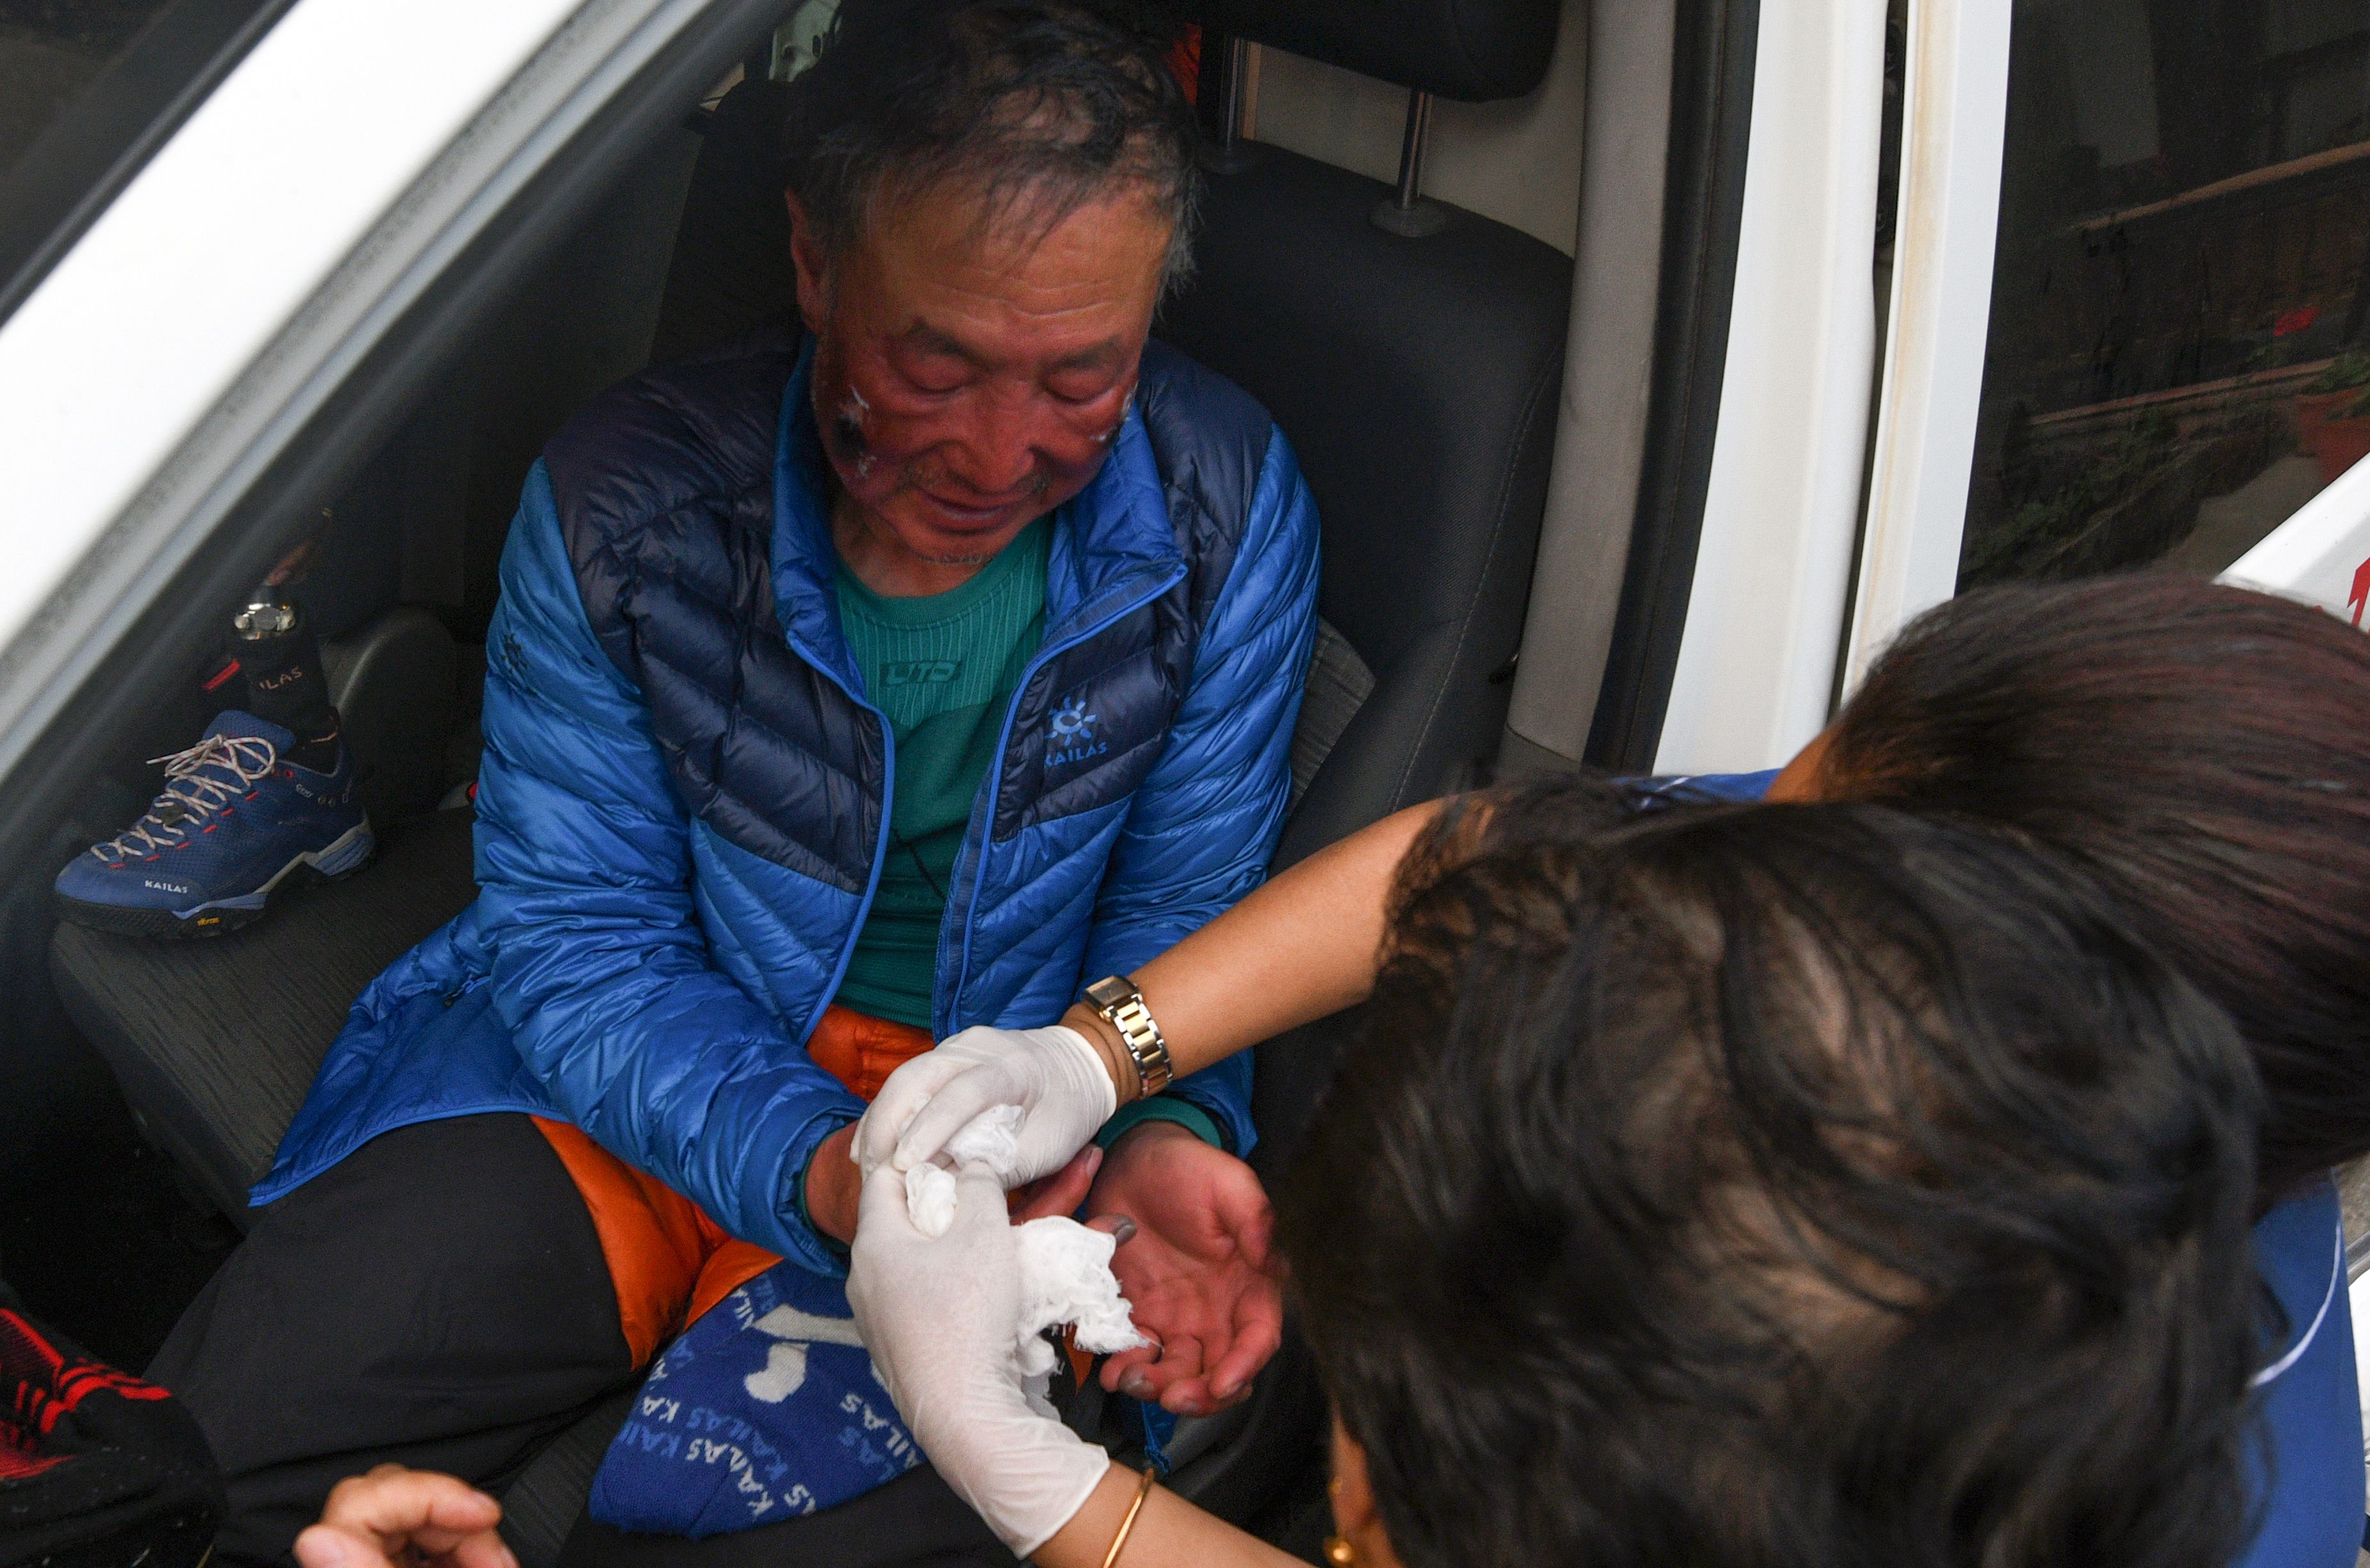 In this picture taken on May 16, 2018, Chinese double amputee climber Xia Boyu receives medical attention after returning from a successful summit of Mount Everest in Kathmandu. (Prakash Mathema—AFP/Getty Images)